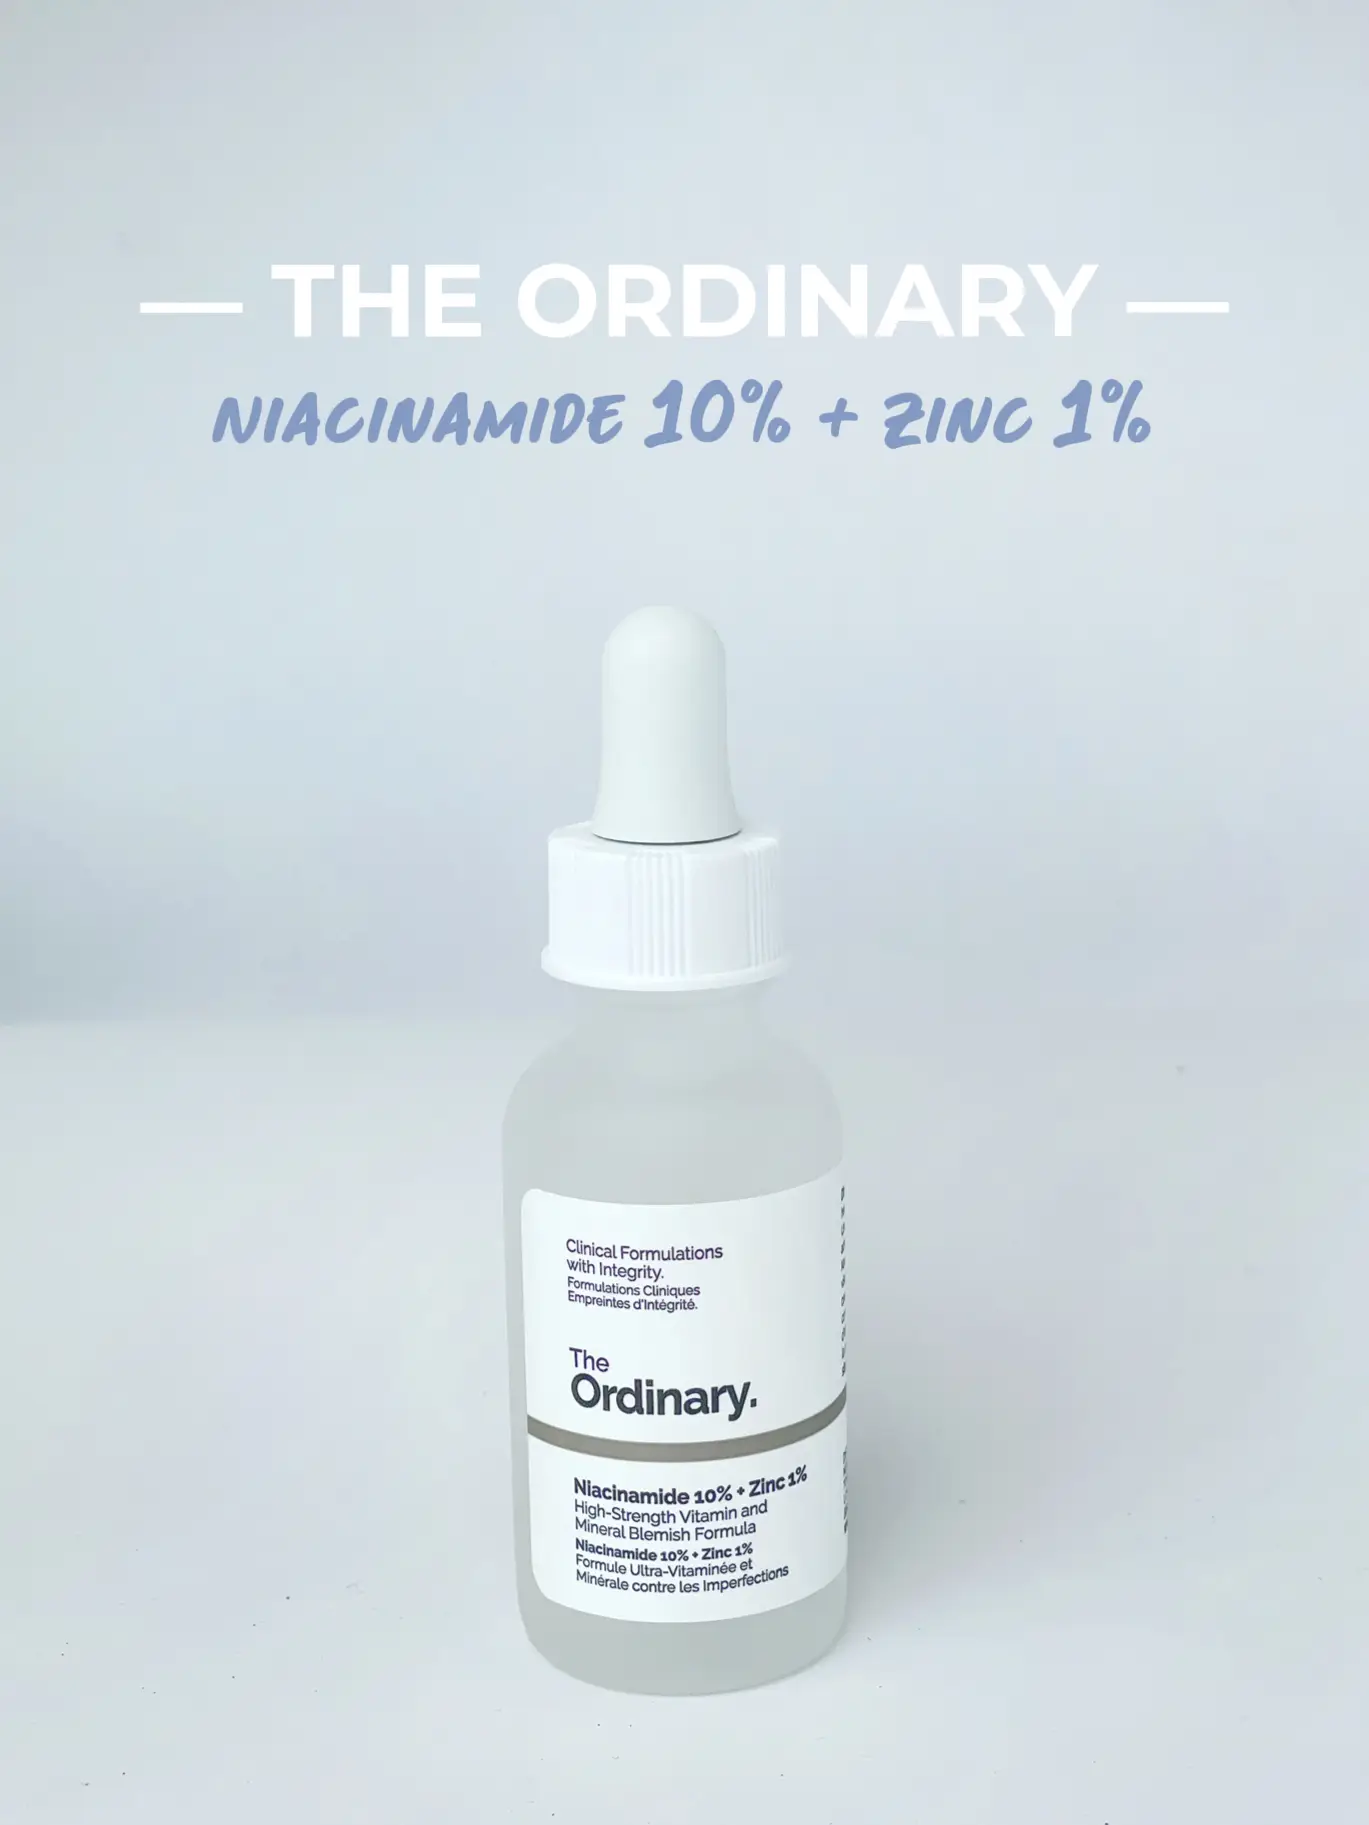 Niacinamide & The Ordinary Review 's images(0)